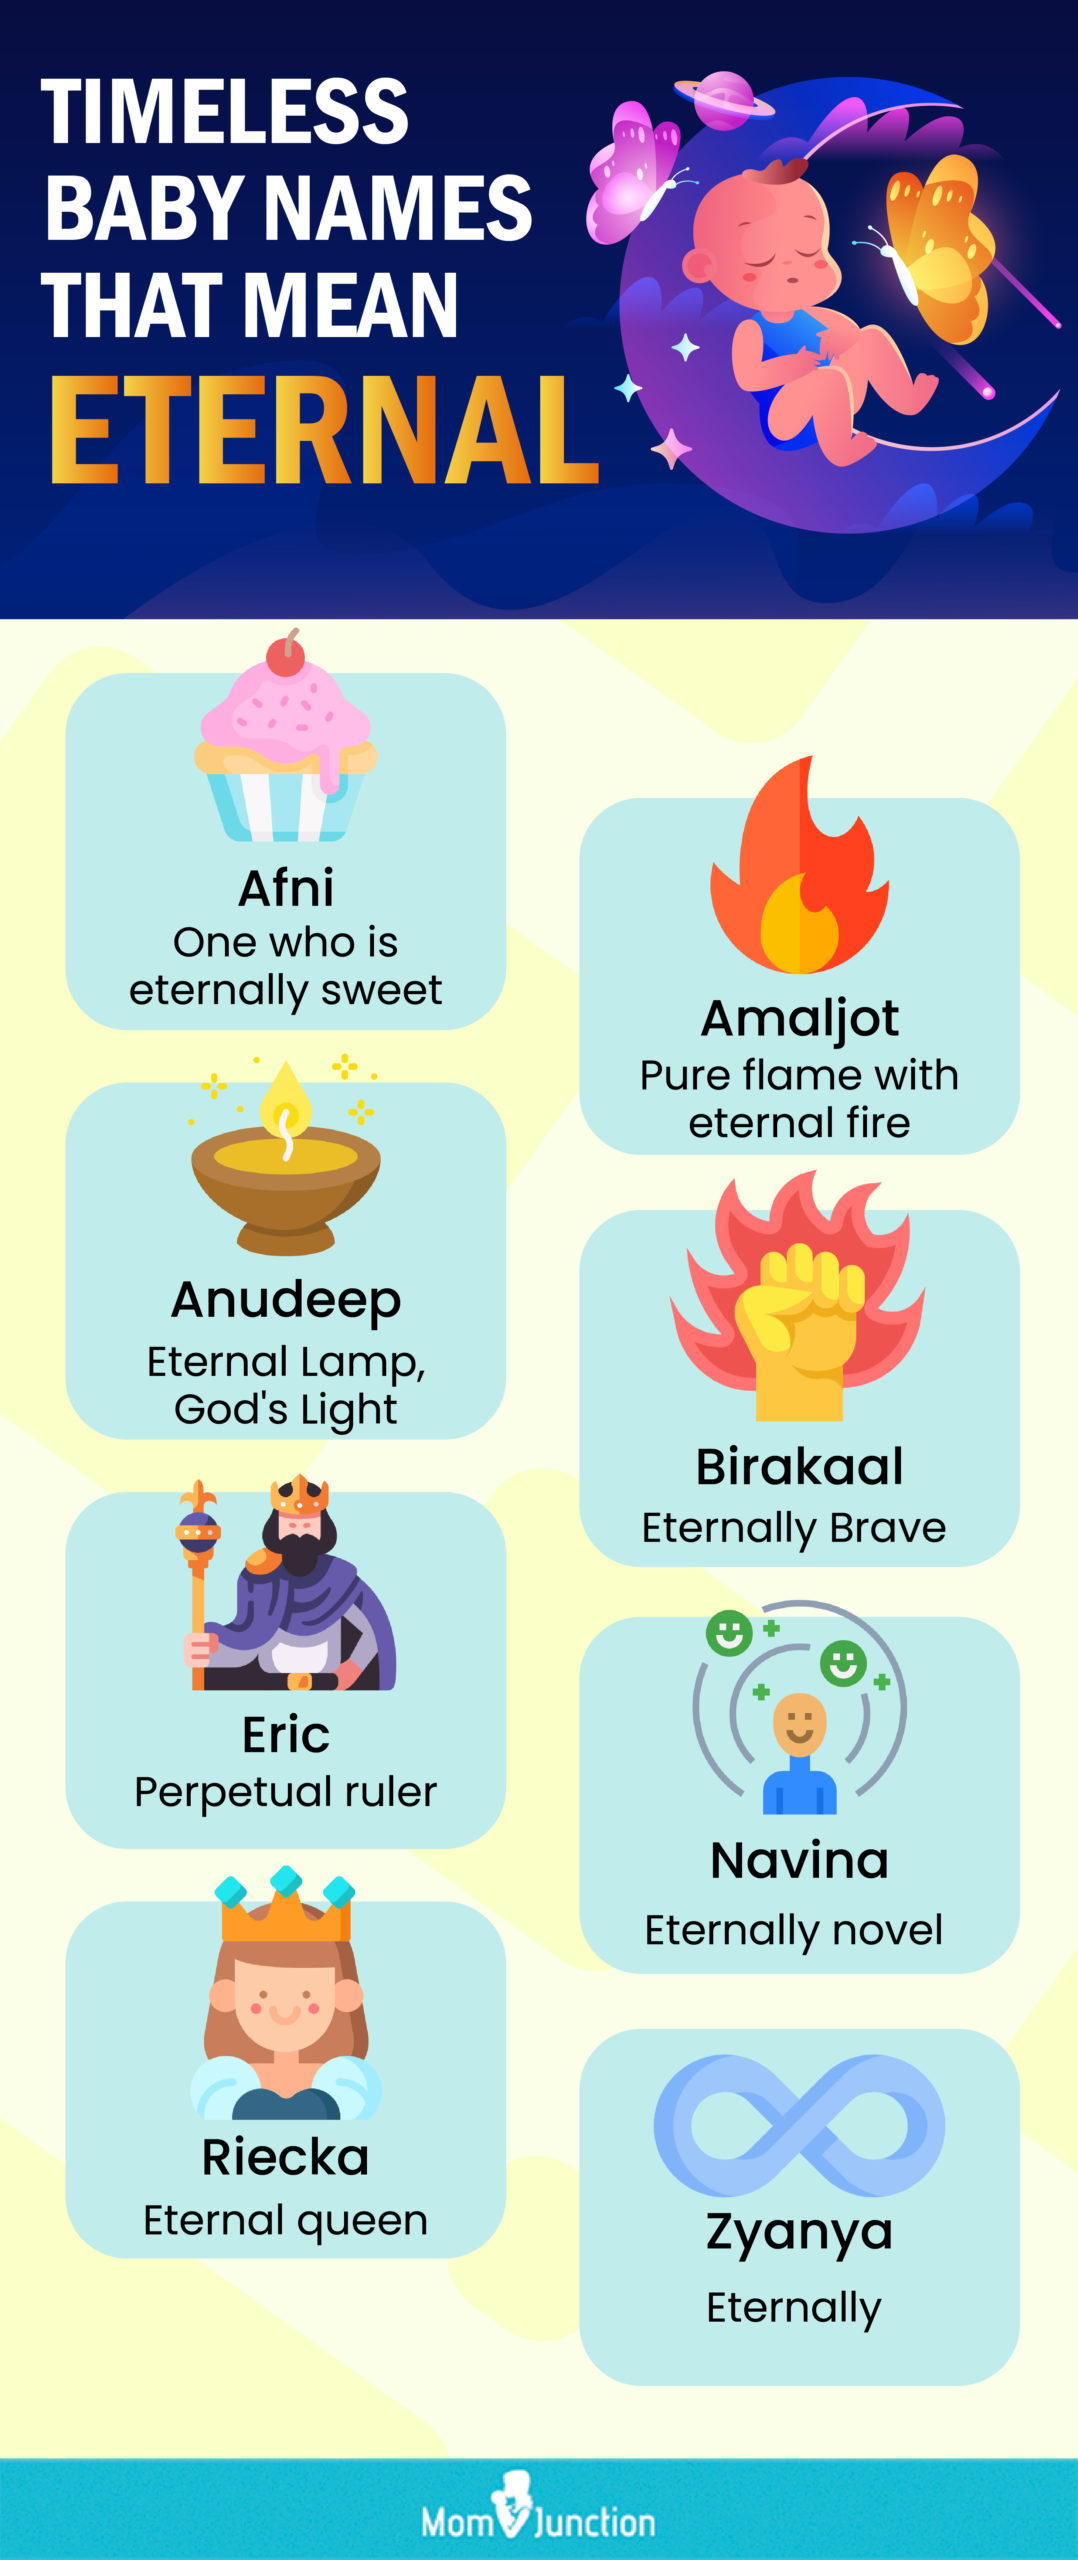 endearing baby names that symbolize eternity (infographic)